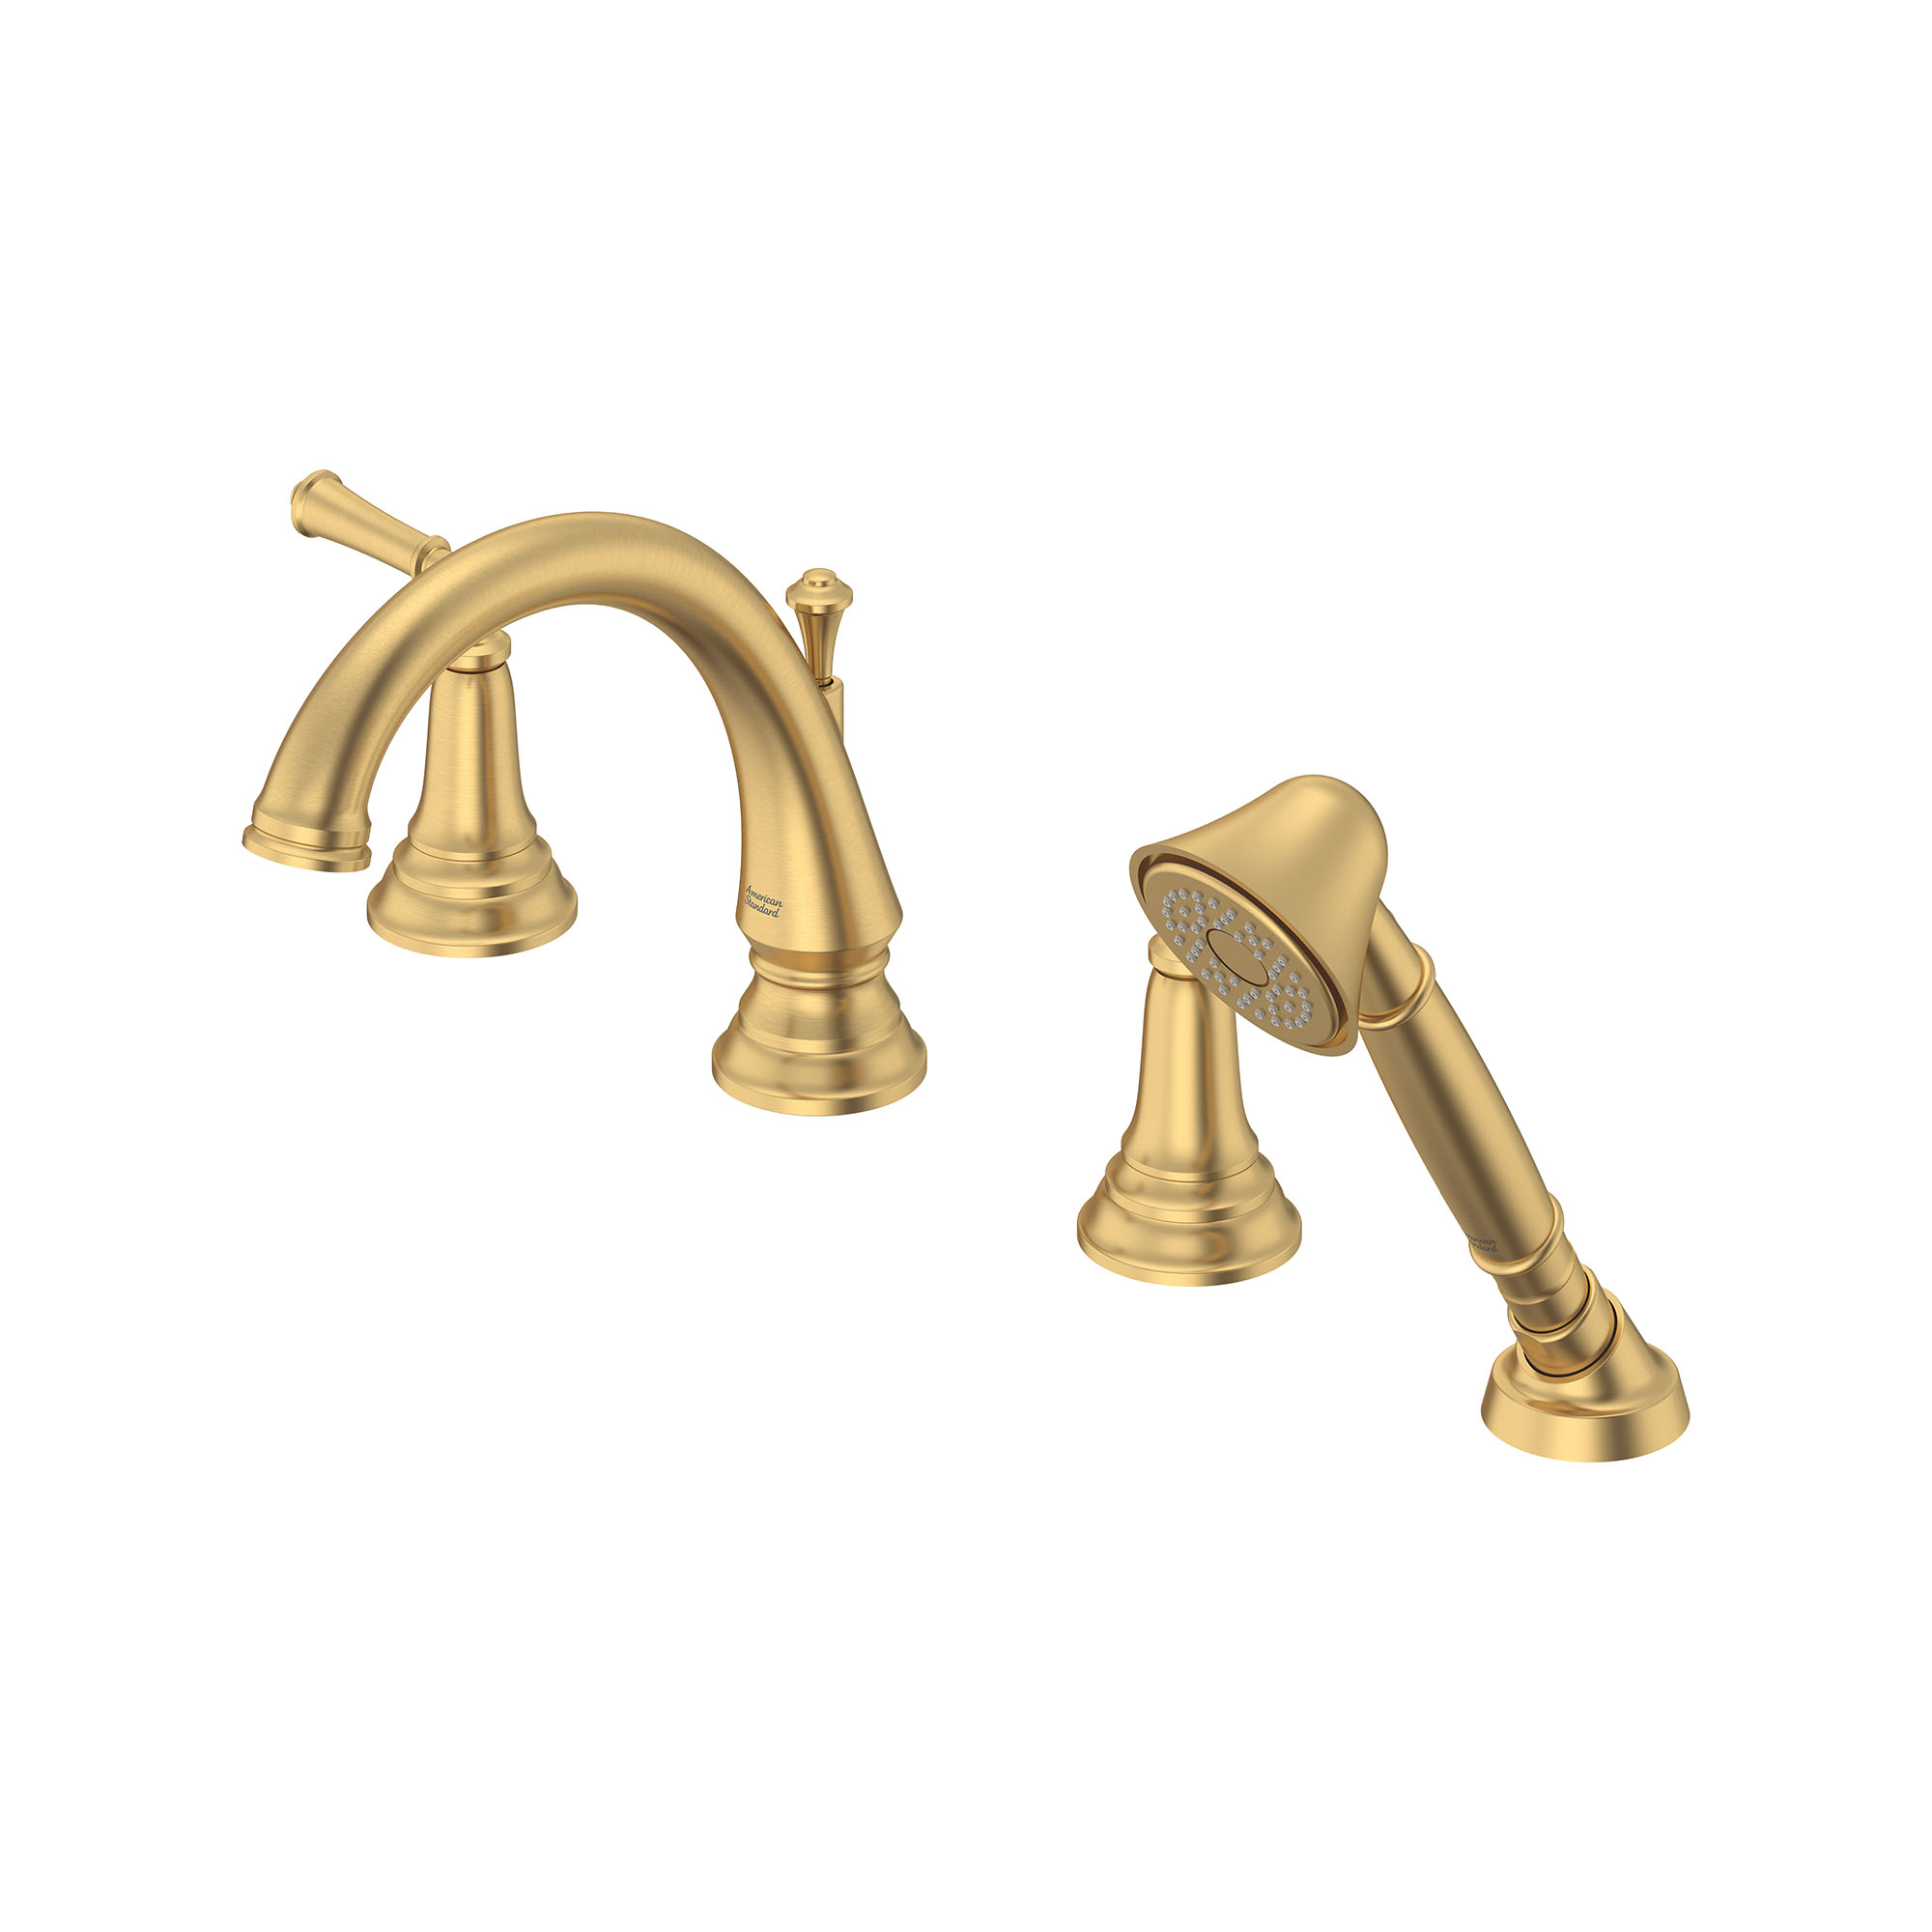 Delancey® Bathtub Faucet With  Lever Handles and Personal Shower for Flash® Rough-In Valve